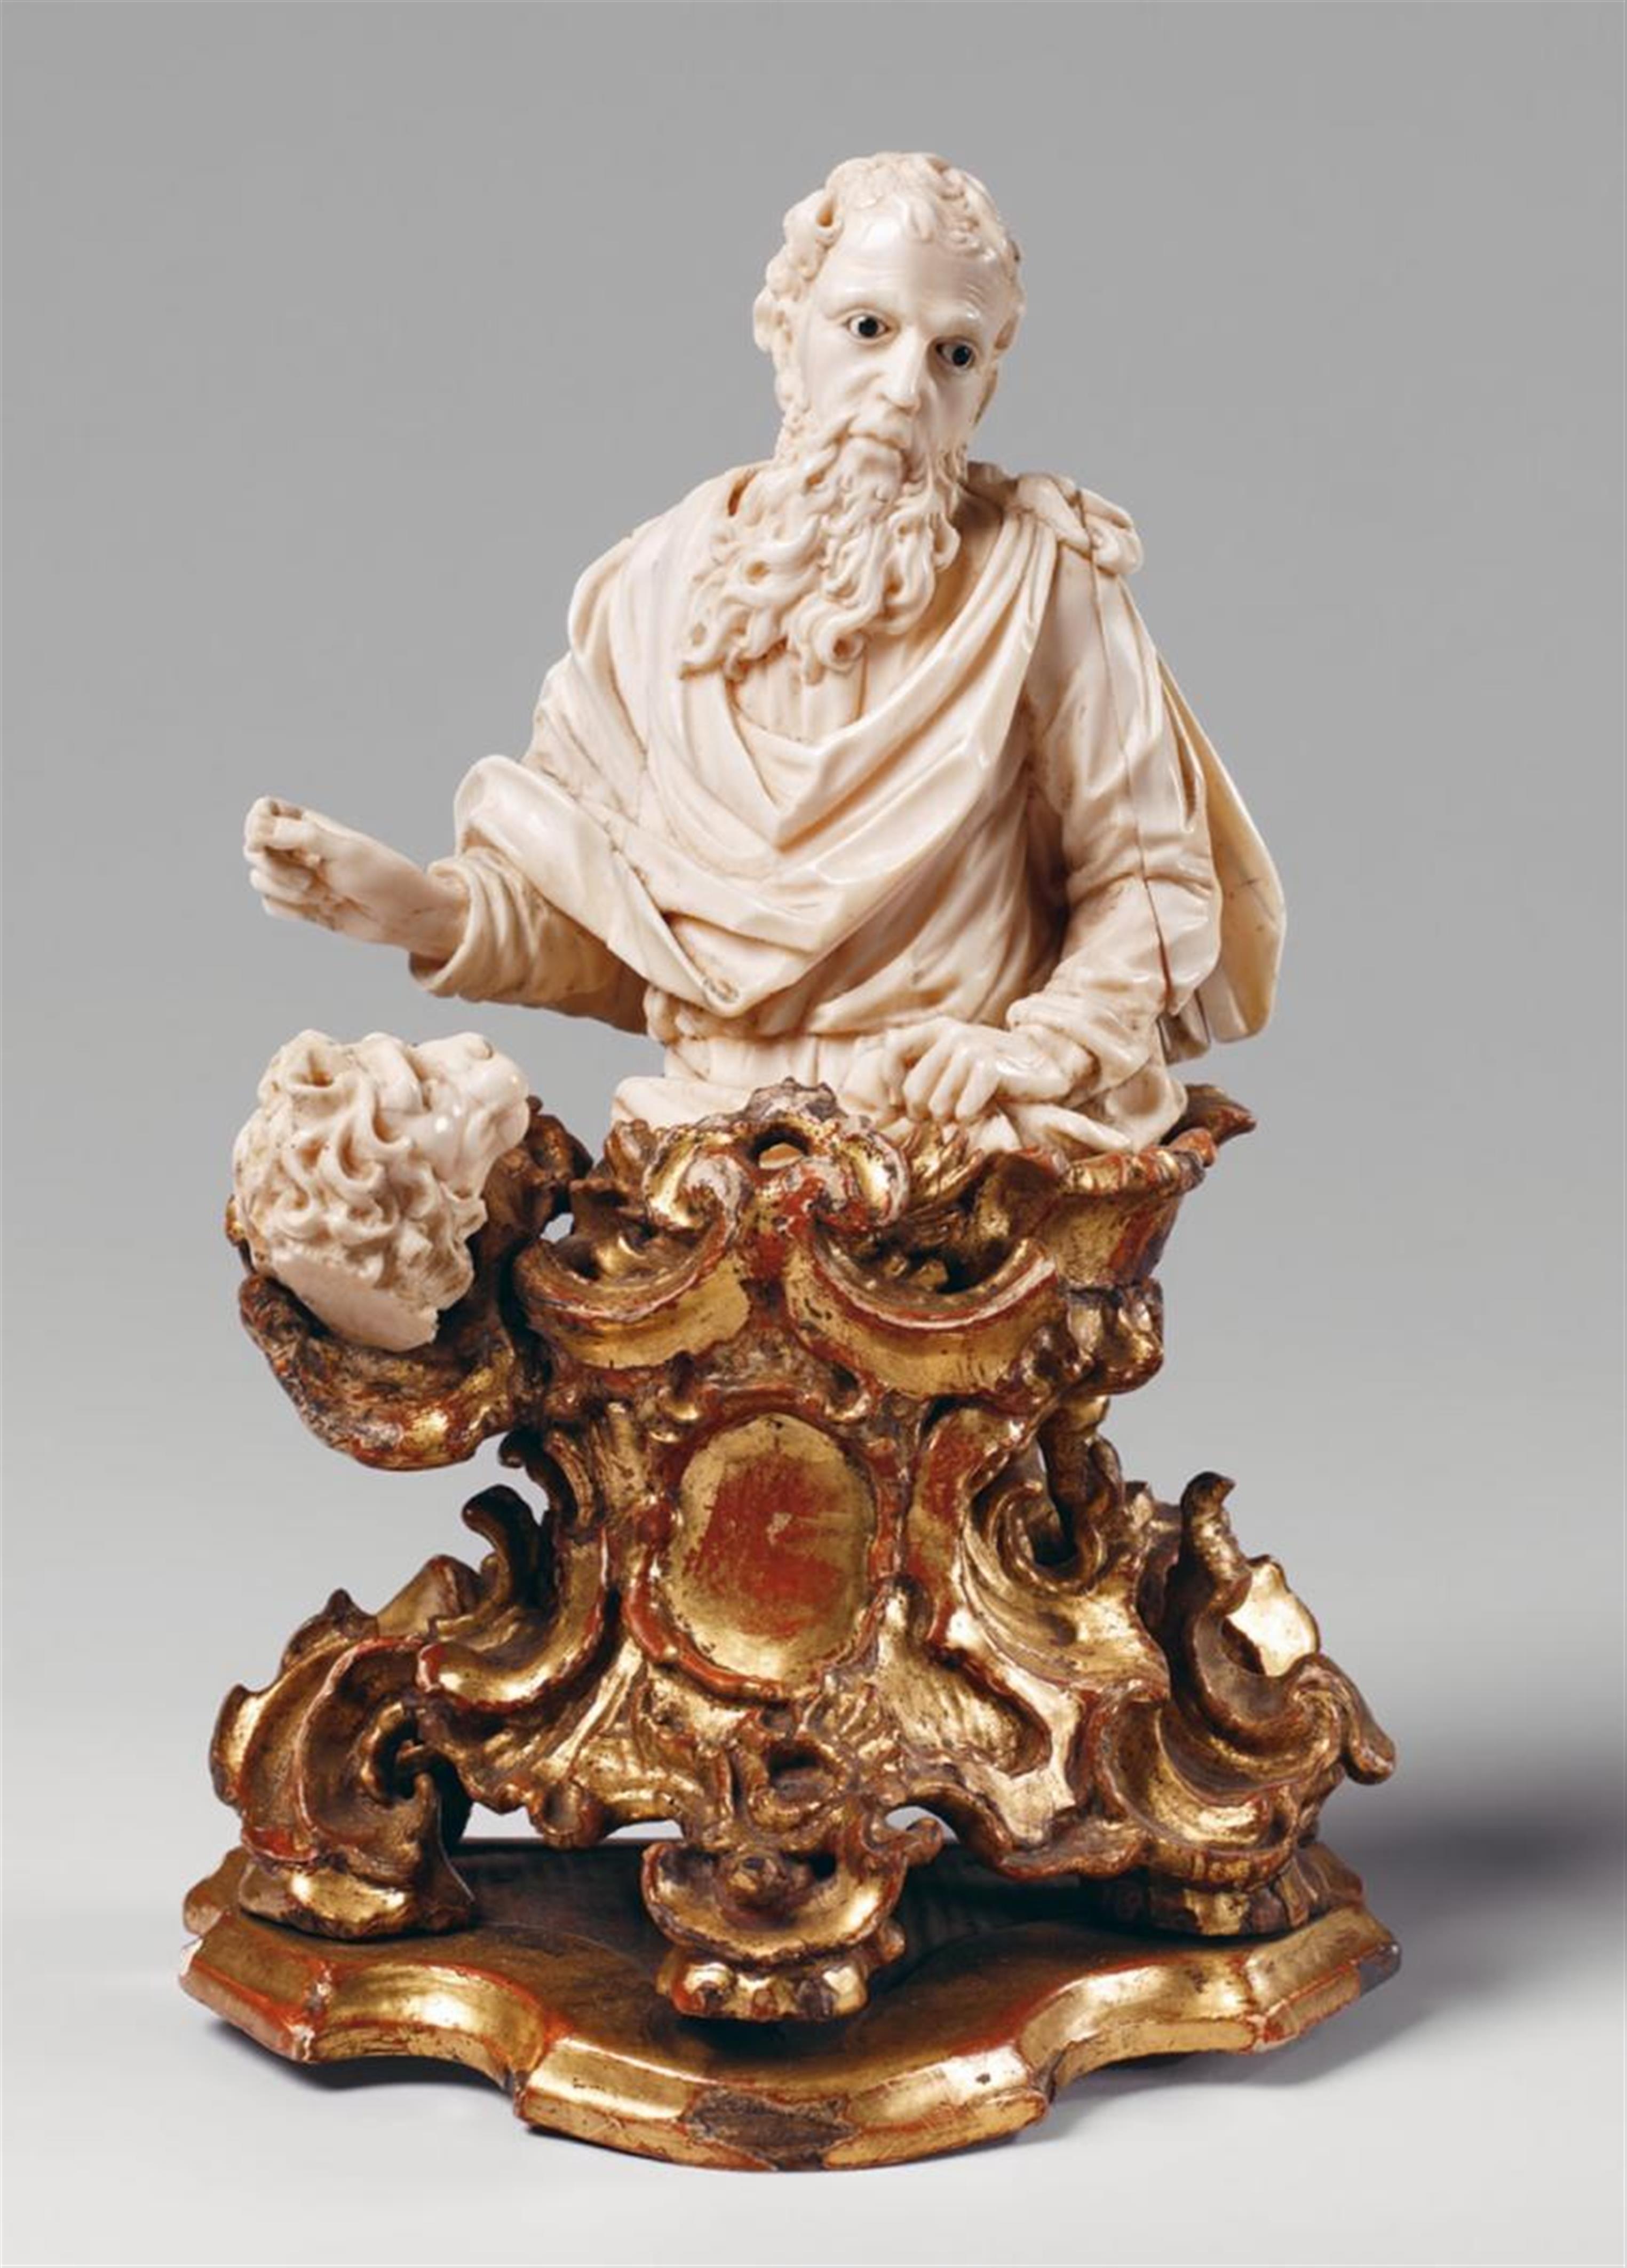 South German, circa 1770 - A SOUTH GERMAN CARVED IVORY FIGURE OF THE EVANGELIST SAINT MARK, CIRCA 1770 - image-1